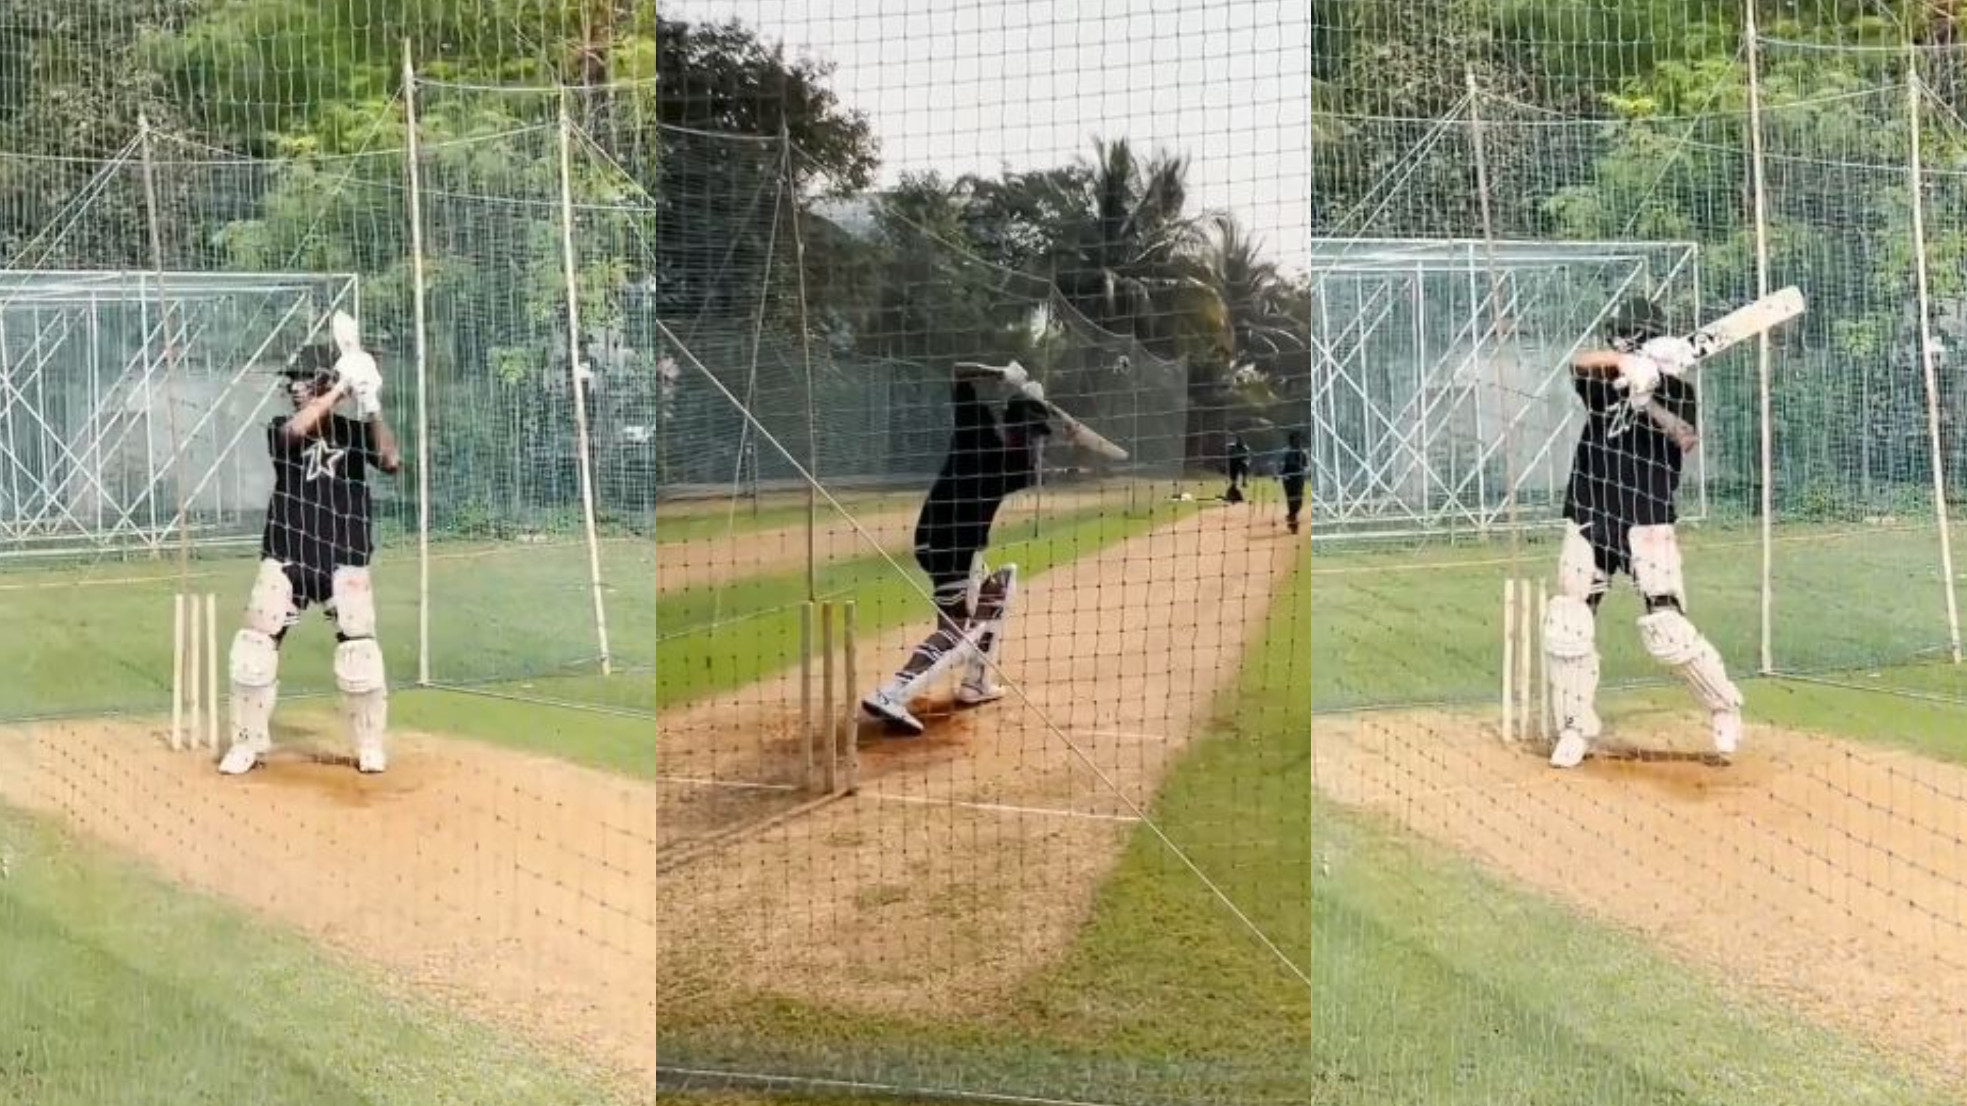 SA v IND 2021-22: WATCH- KL Rahul getting in the groove in nets ahead of South Africa tour